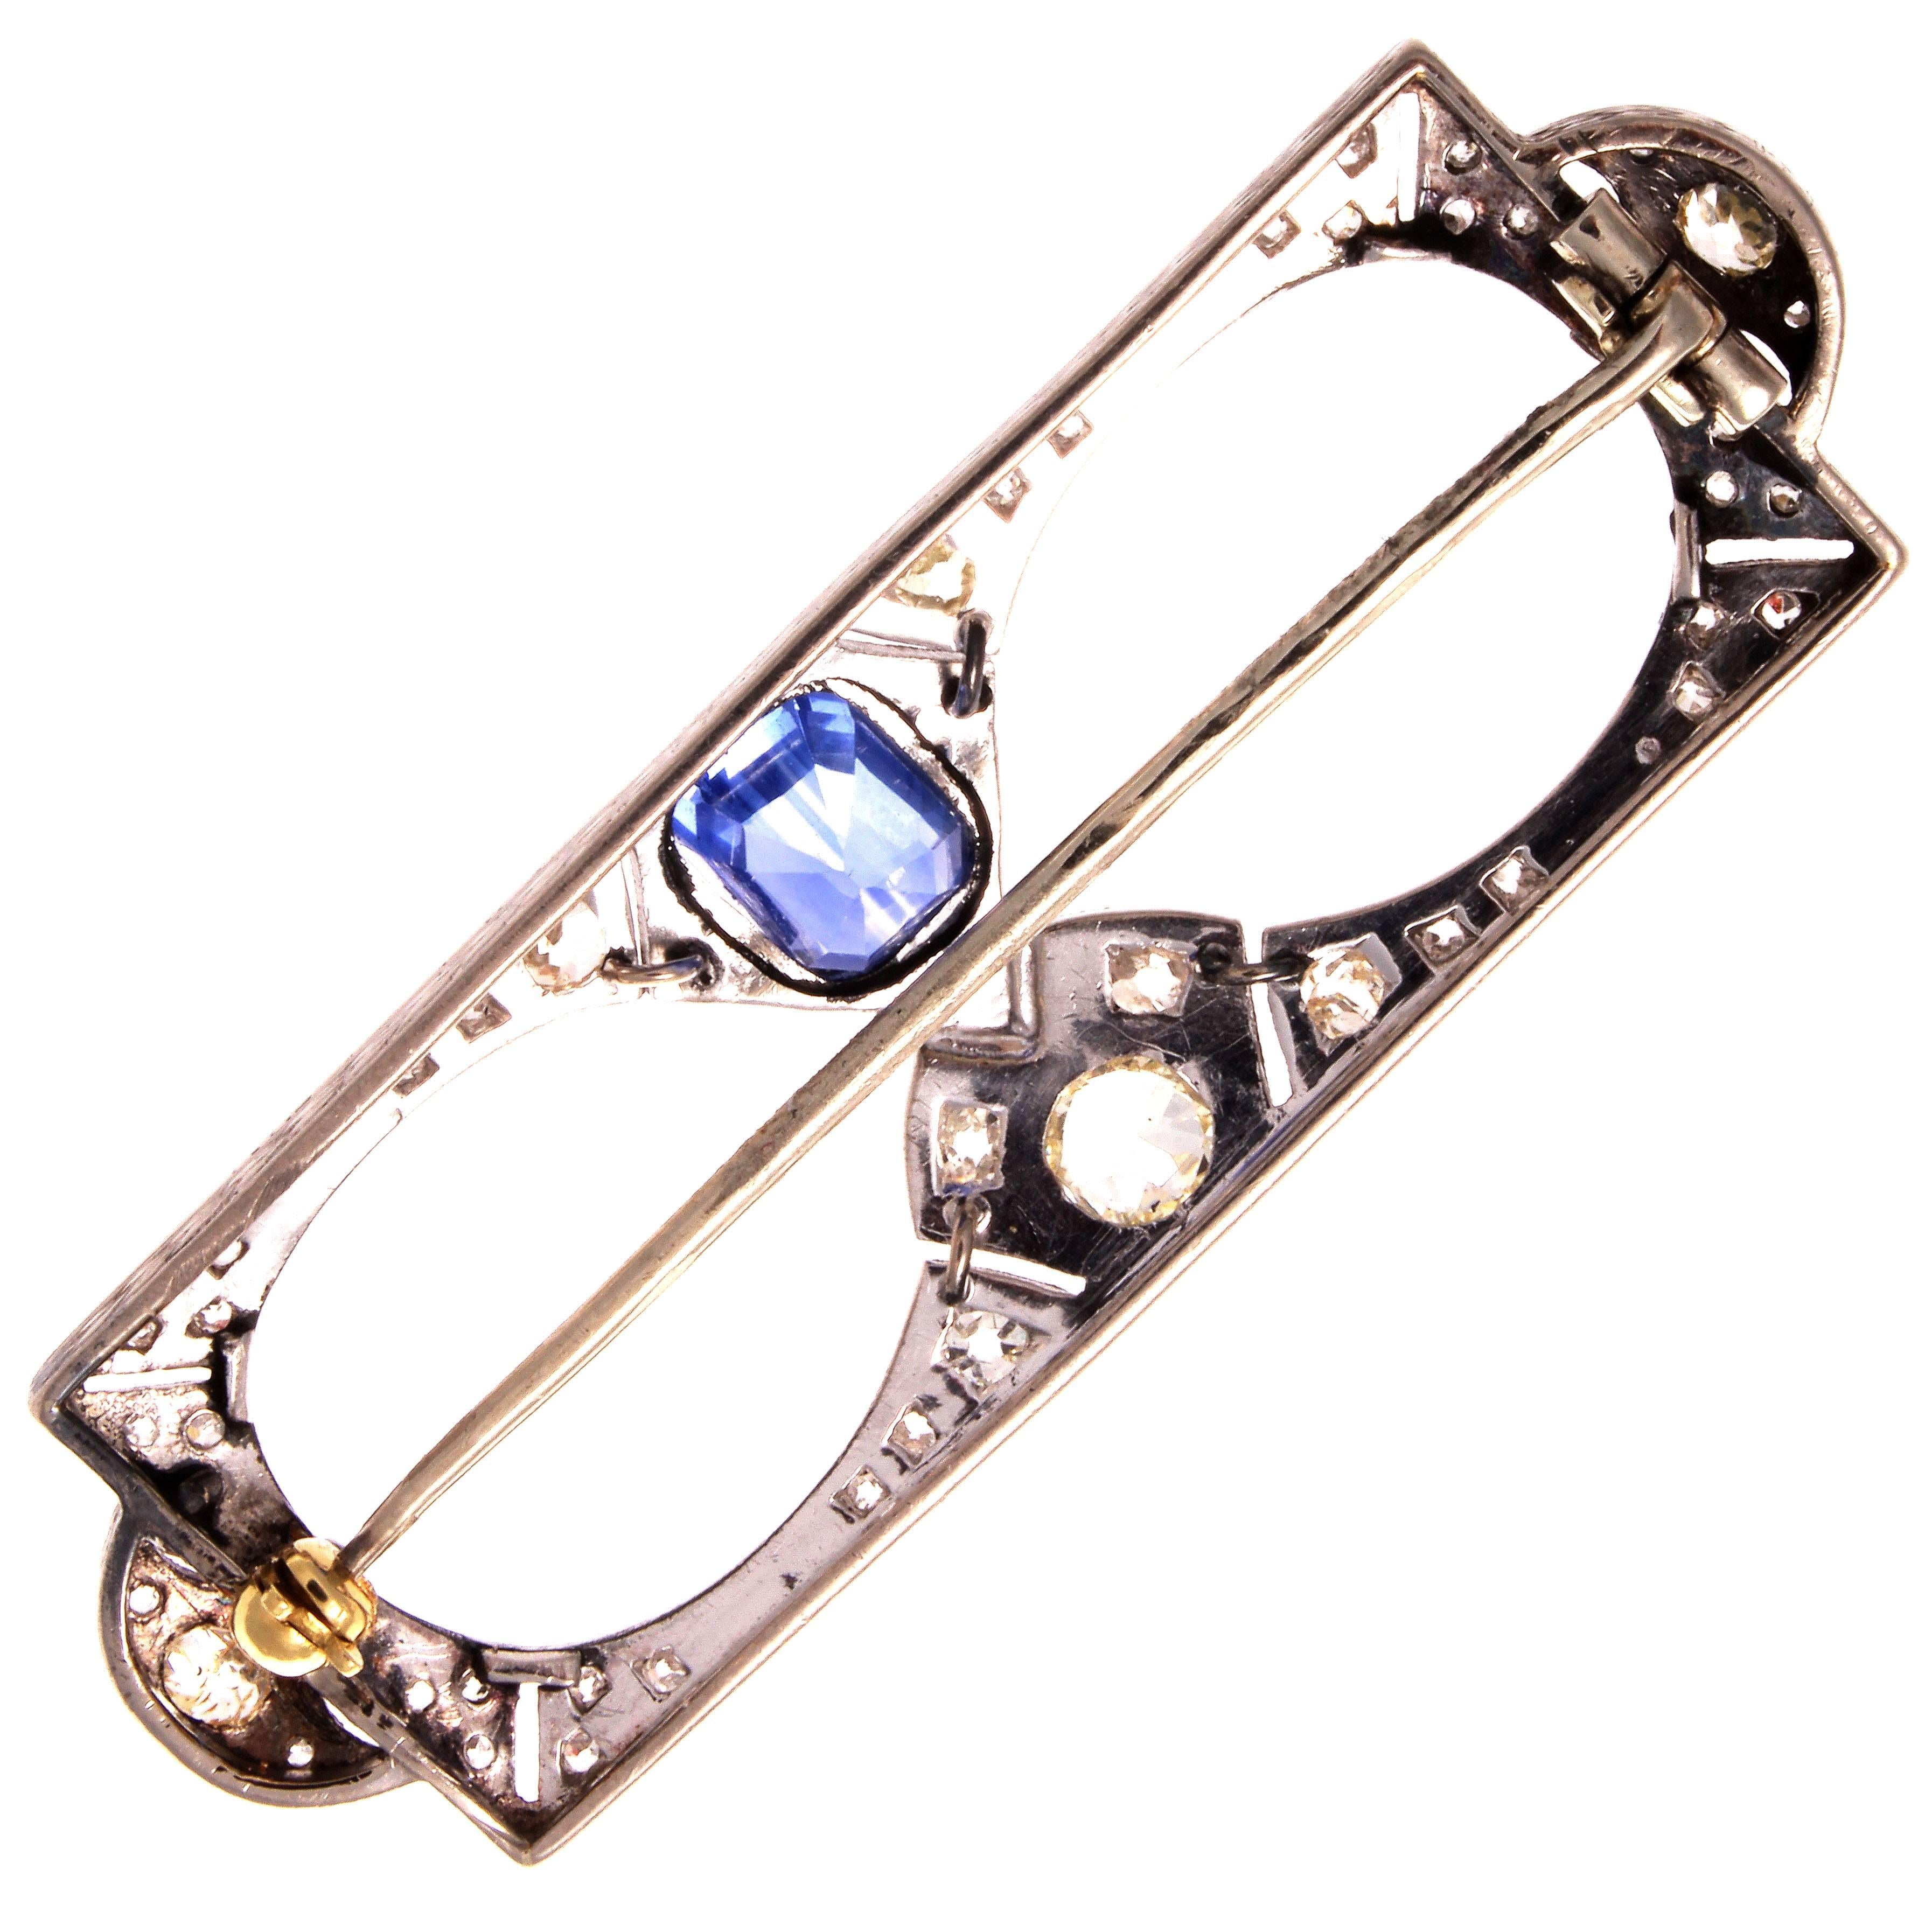 From the romantic and artistic Belle Époque era. An original brooch featuring a lovely blue sapphire of about 3+ carats. Hand made in platinum and gold with accenting diamonds.